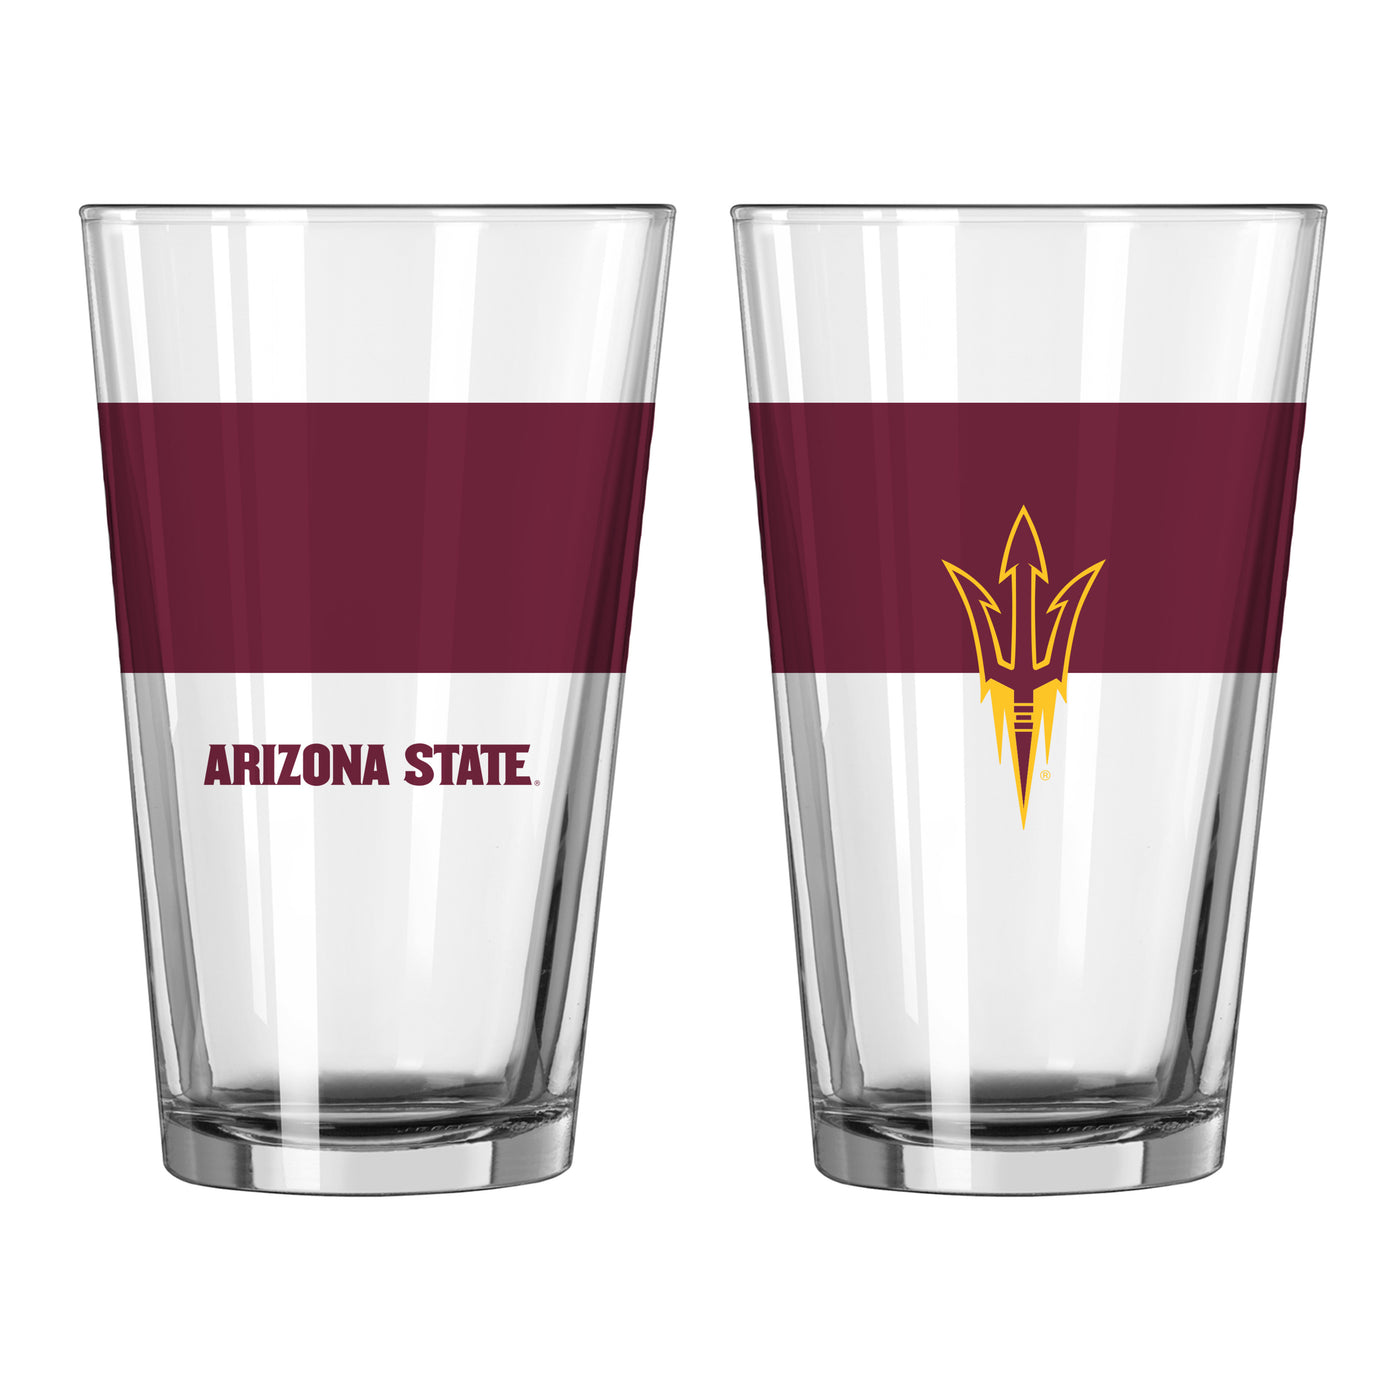 Back and front of ASU pint glass with maroon stripe on it and 'Arizona State' on one side and a pitchfork on the other side